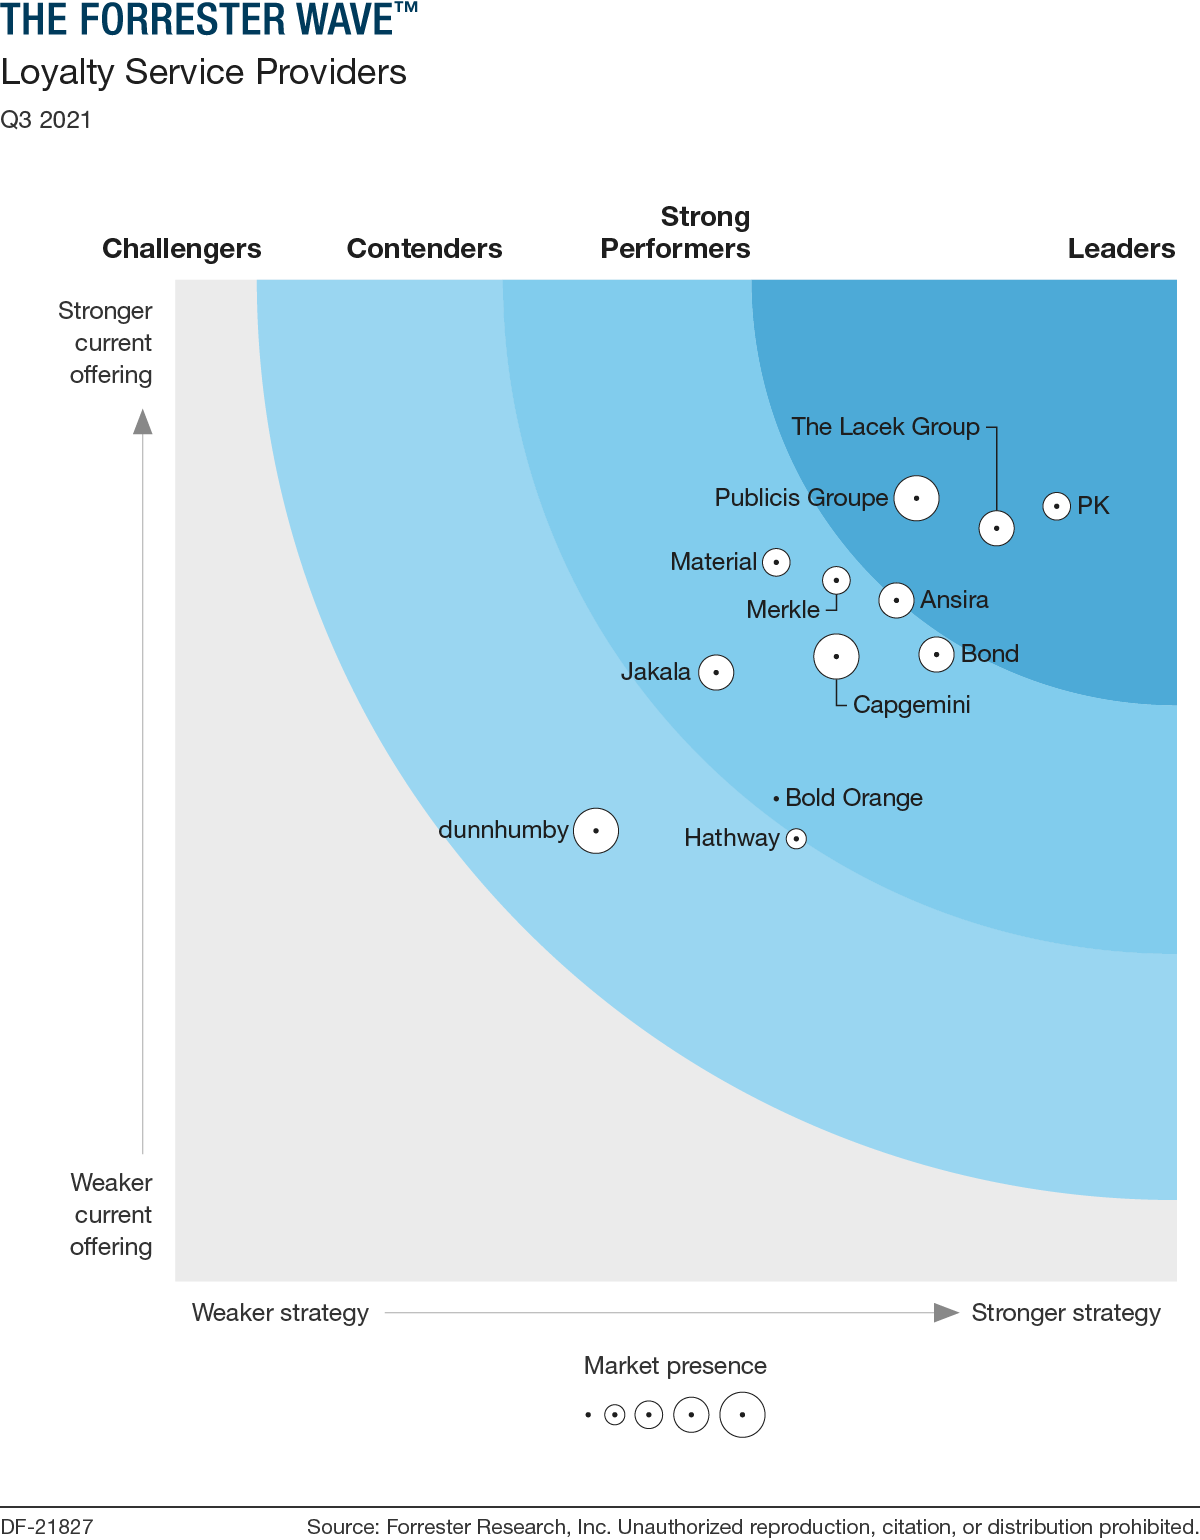 The Forrester Wave Loyalty Service Providers Q3 2021